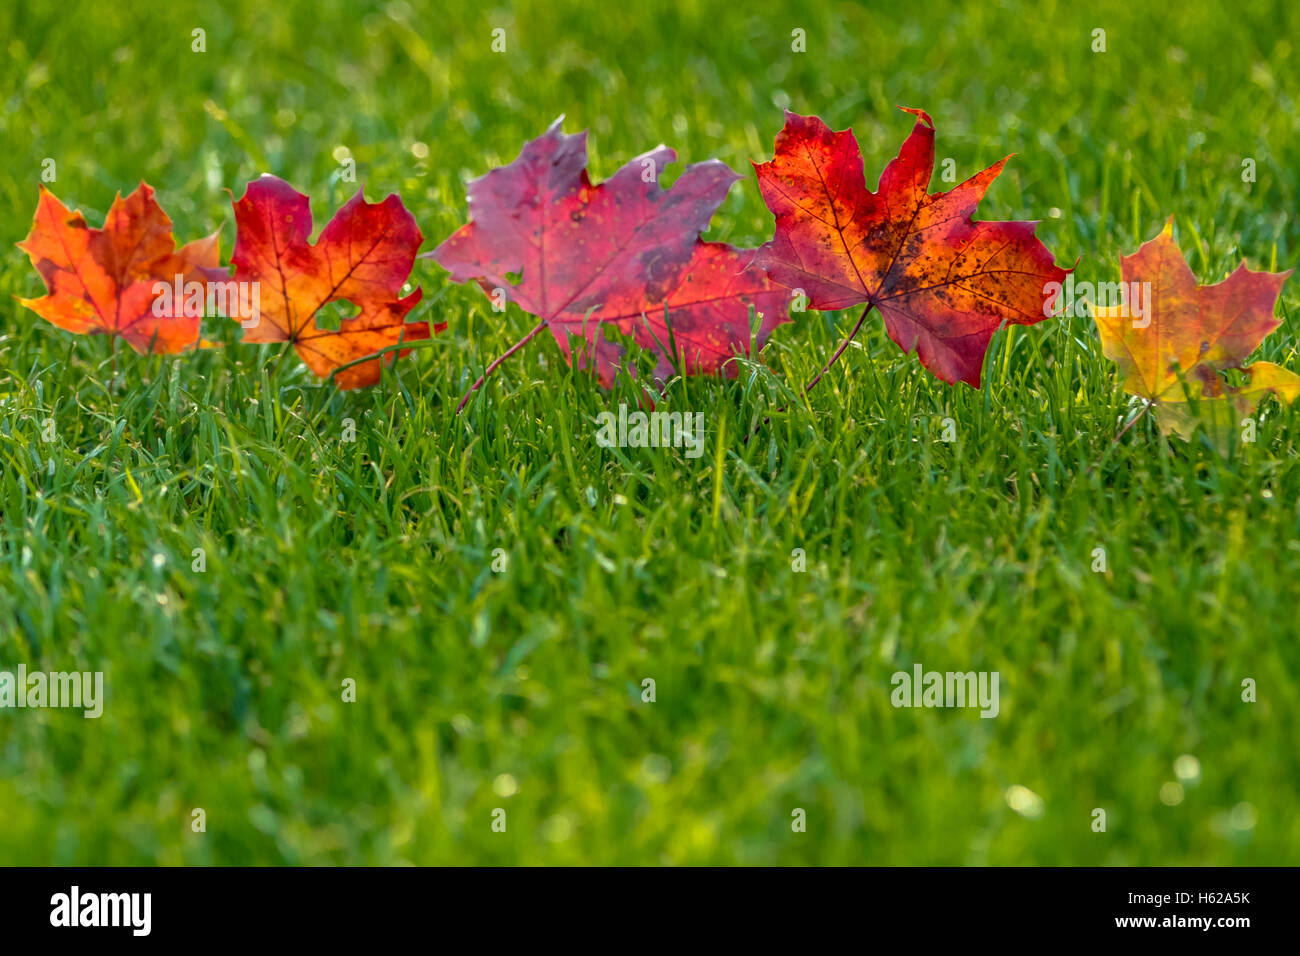 Red leaves in a row on the green grass Stock Photo